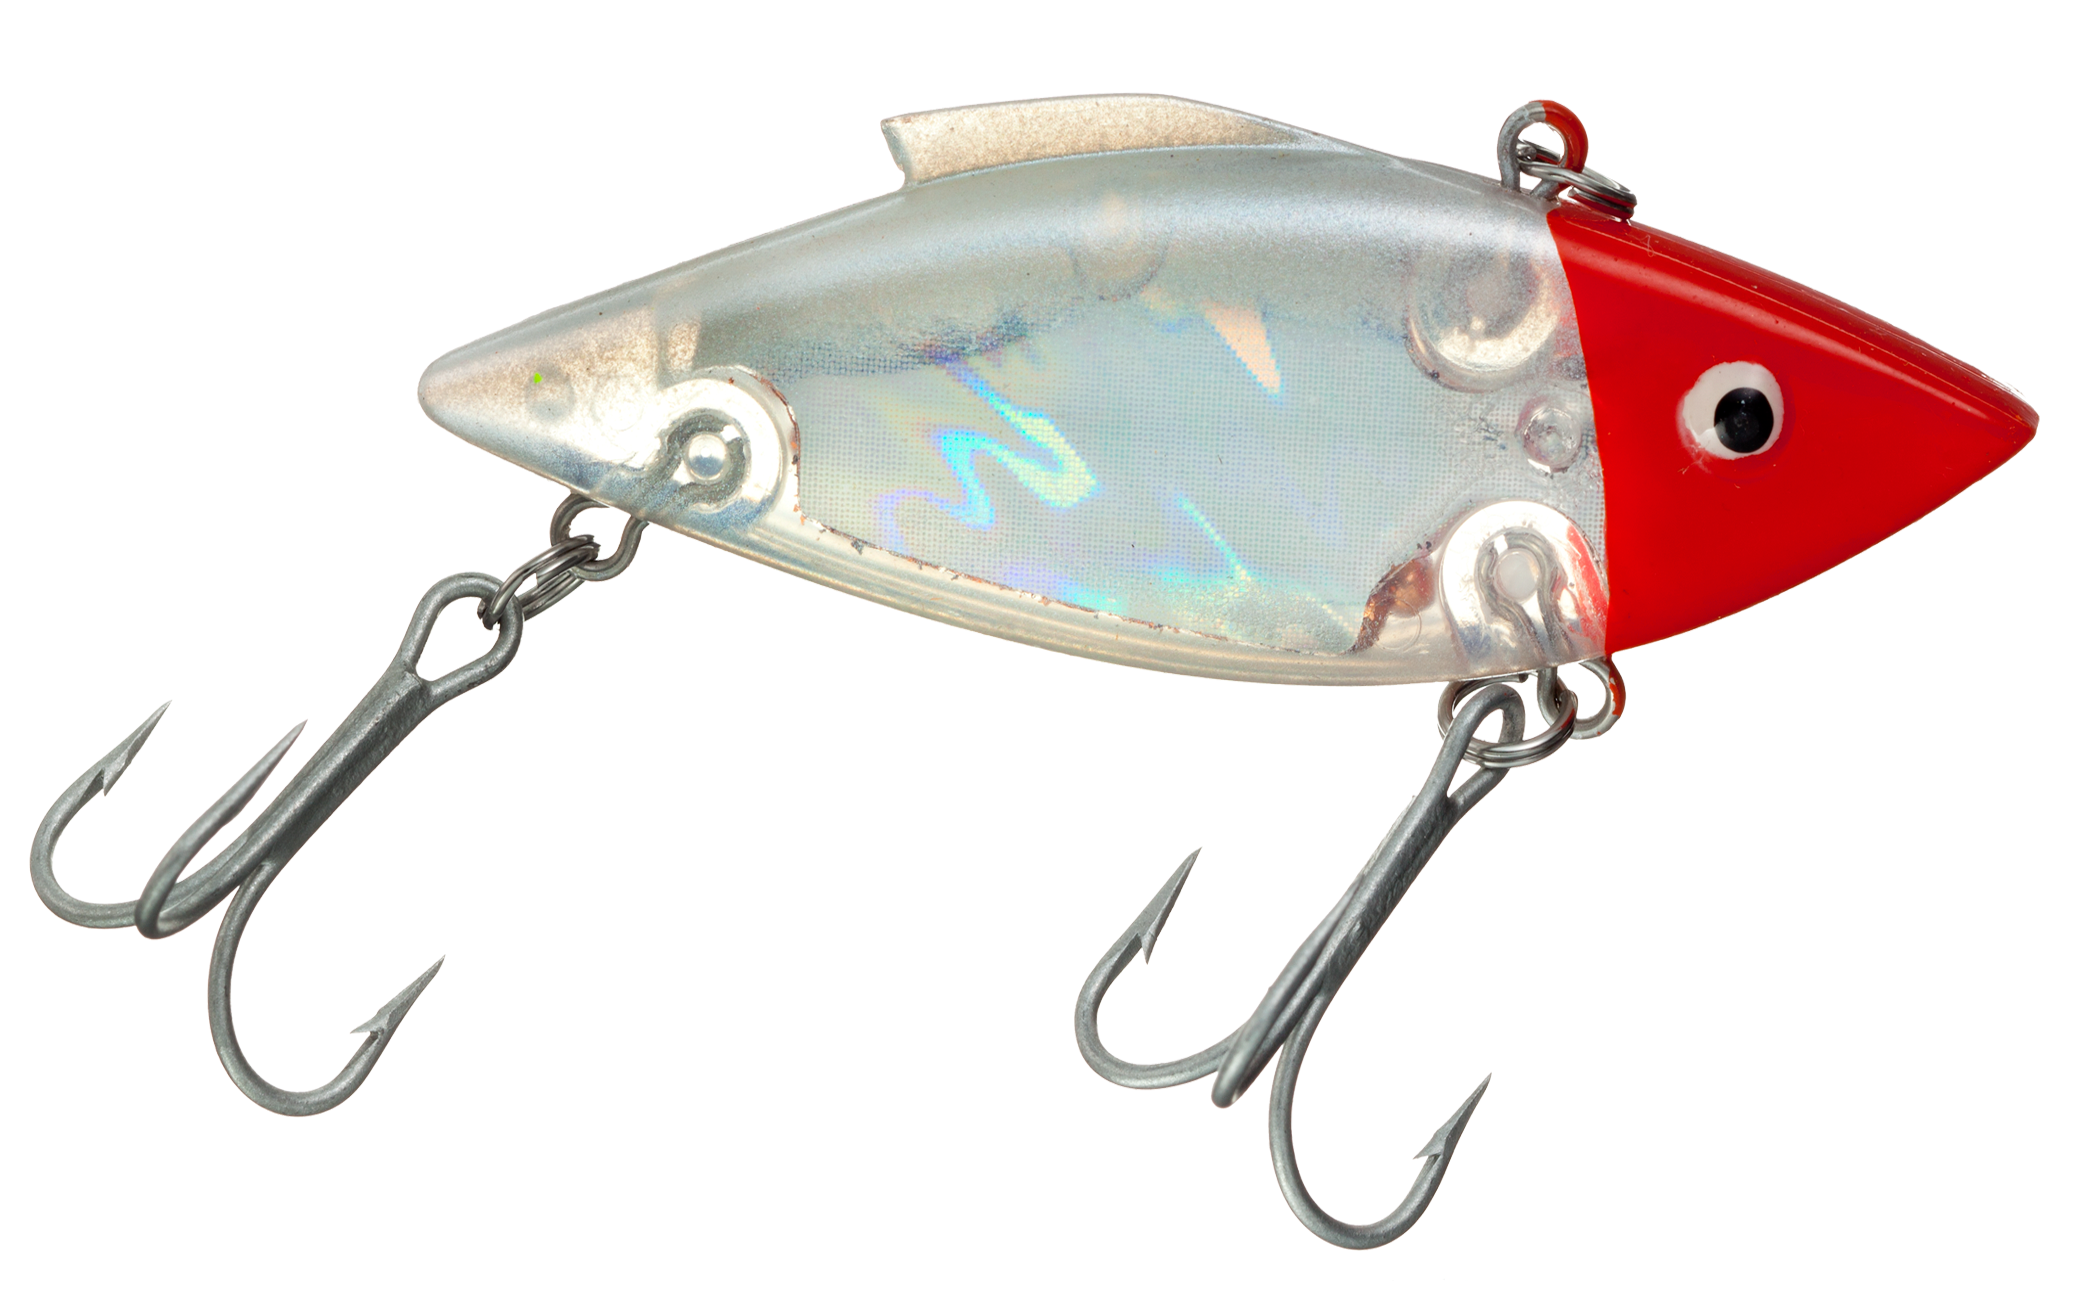 3/4 Oz. Bill Lewis Rat-L-Trap Fishing Lure - Pioneer Recycling Services